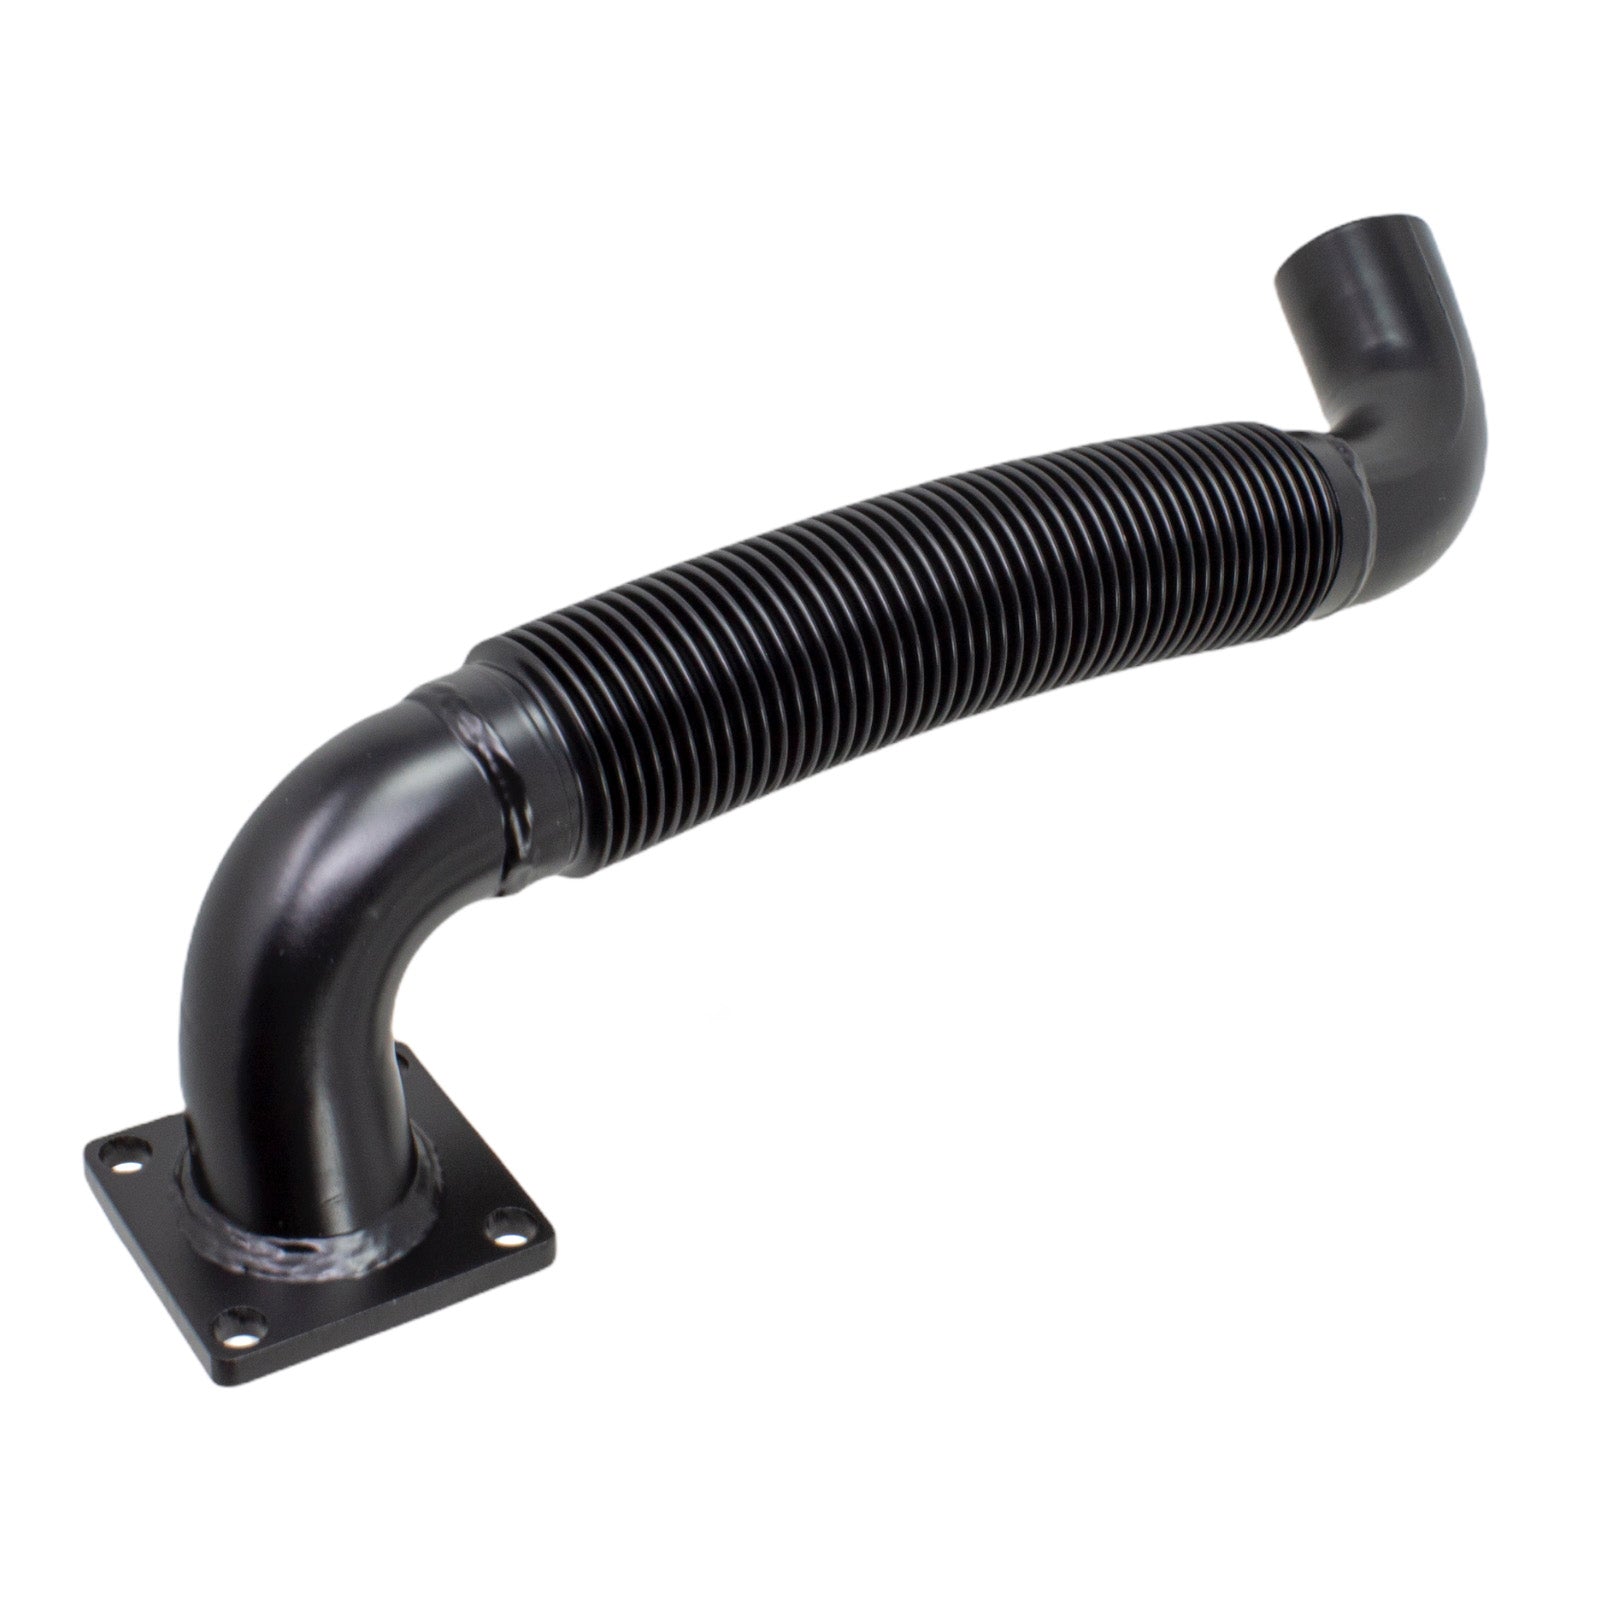 6719566, Exhaust Pipe For Bobcat at Duraforce